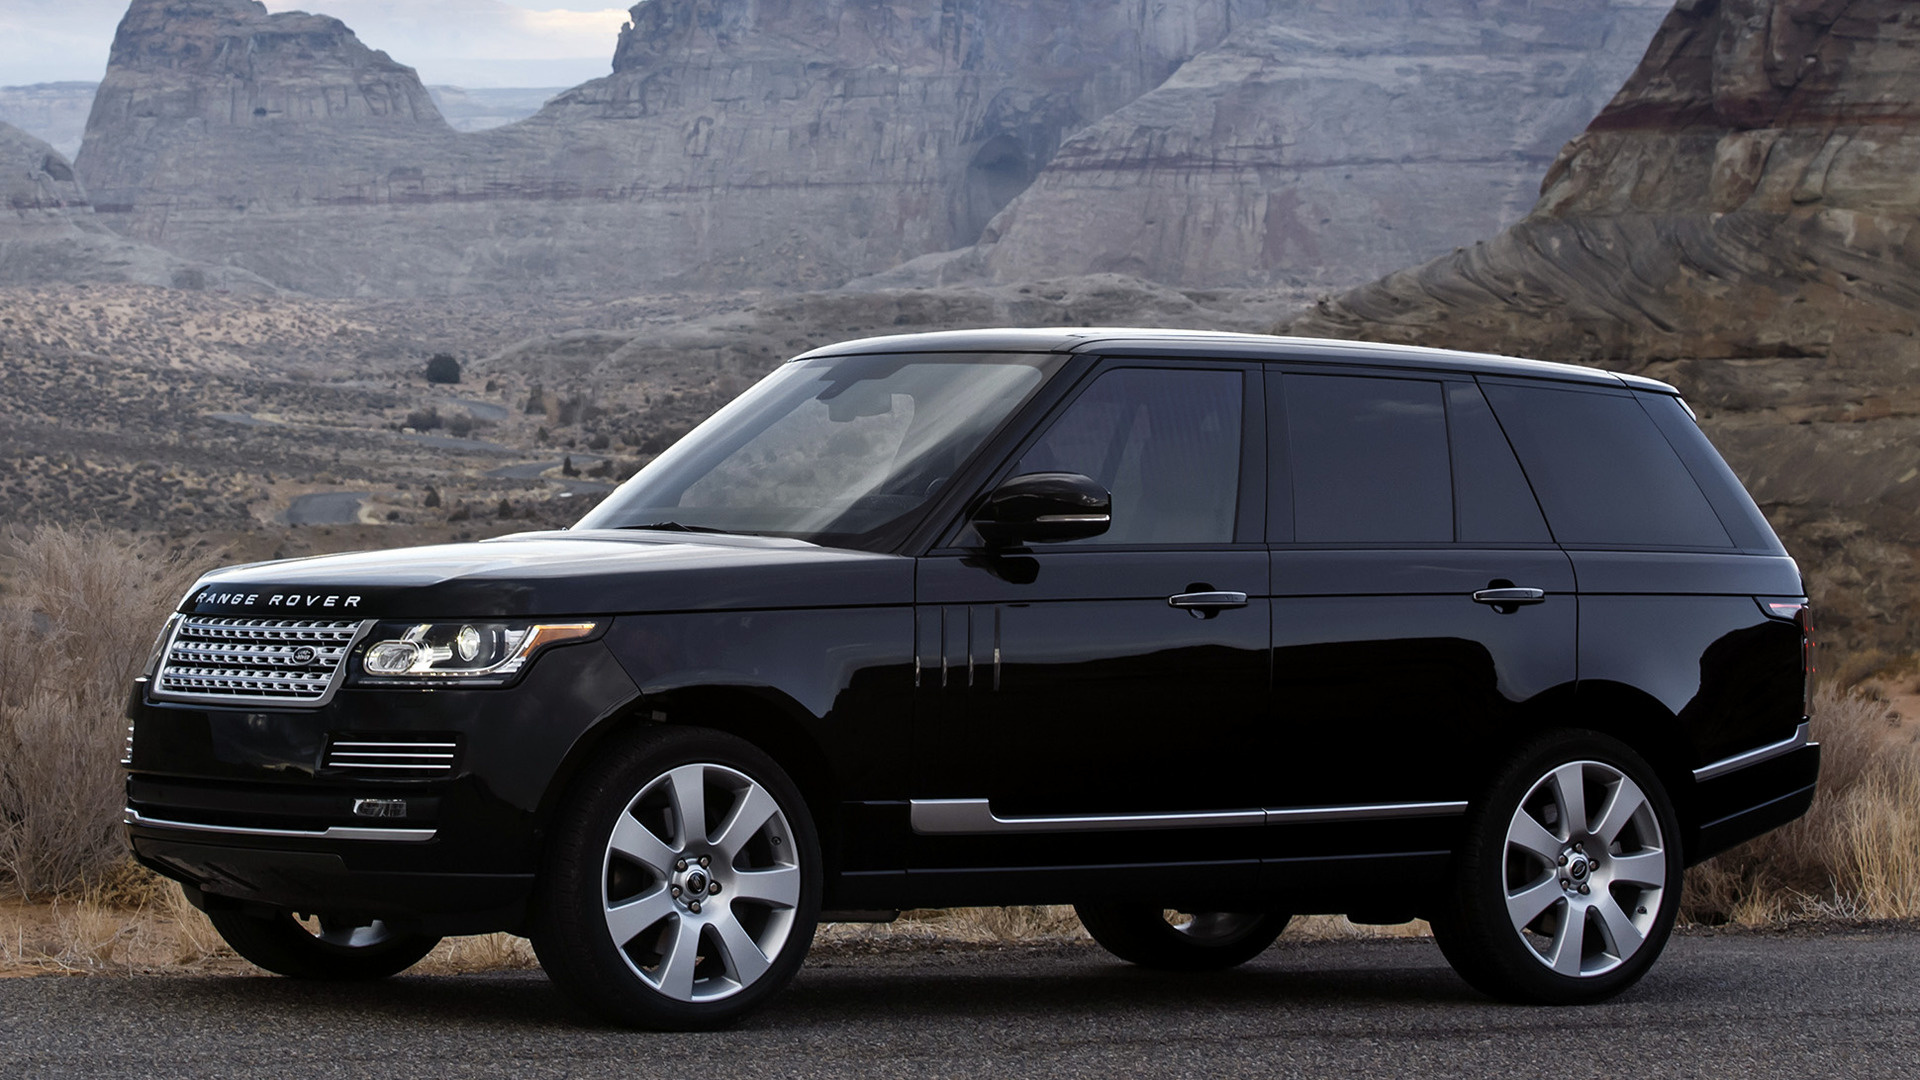 2013 Range Rover Autobiography (US) - Wallpapers and HD Images | Car Pixel